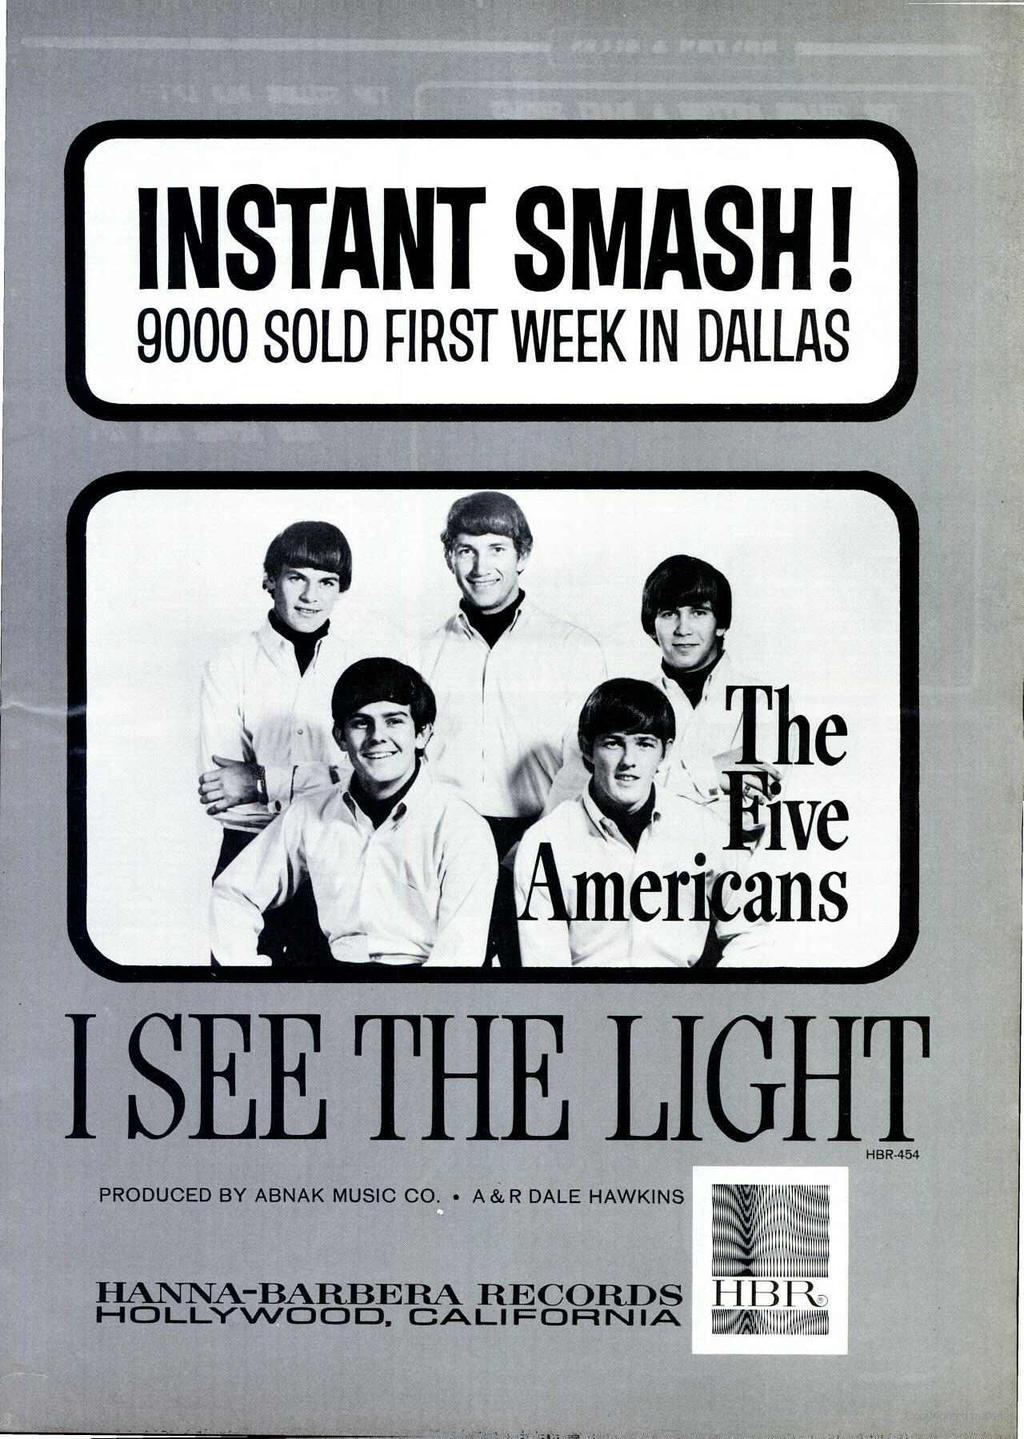 r INSTANT SMASH! 9000 SOLD FIRST WEEK IN DALLAS I SEE THE LIGHT PRODUCED BY ABNAK MUSIC CO.